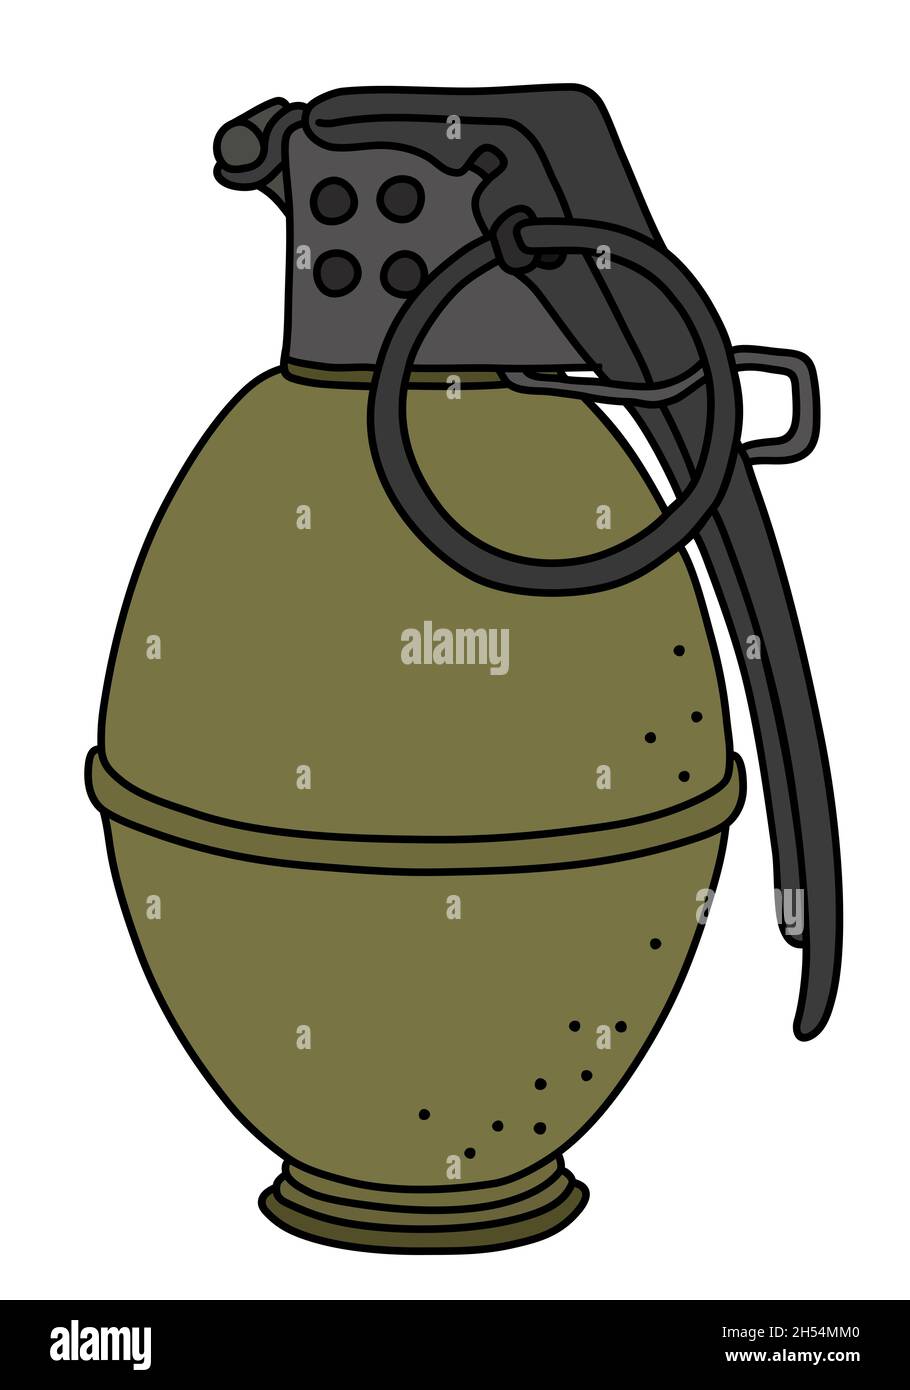 The old khaki offensive hand grenade Stock Photo